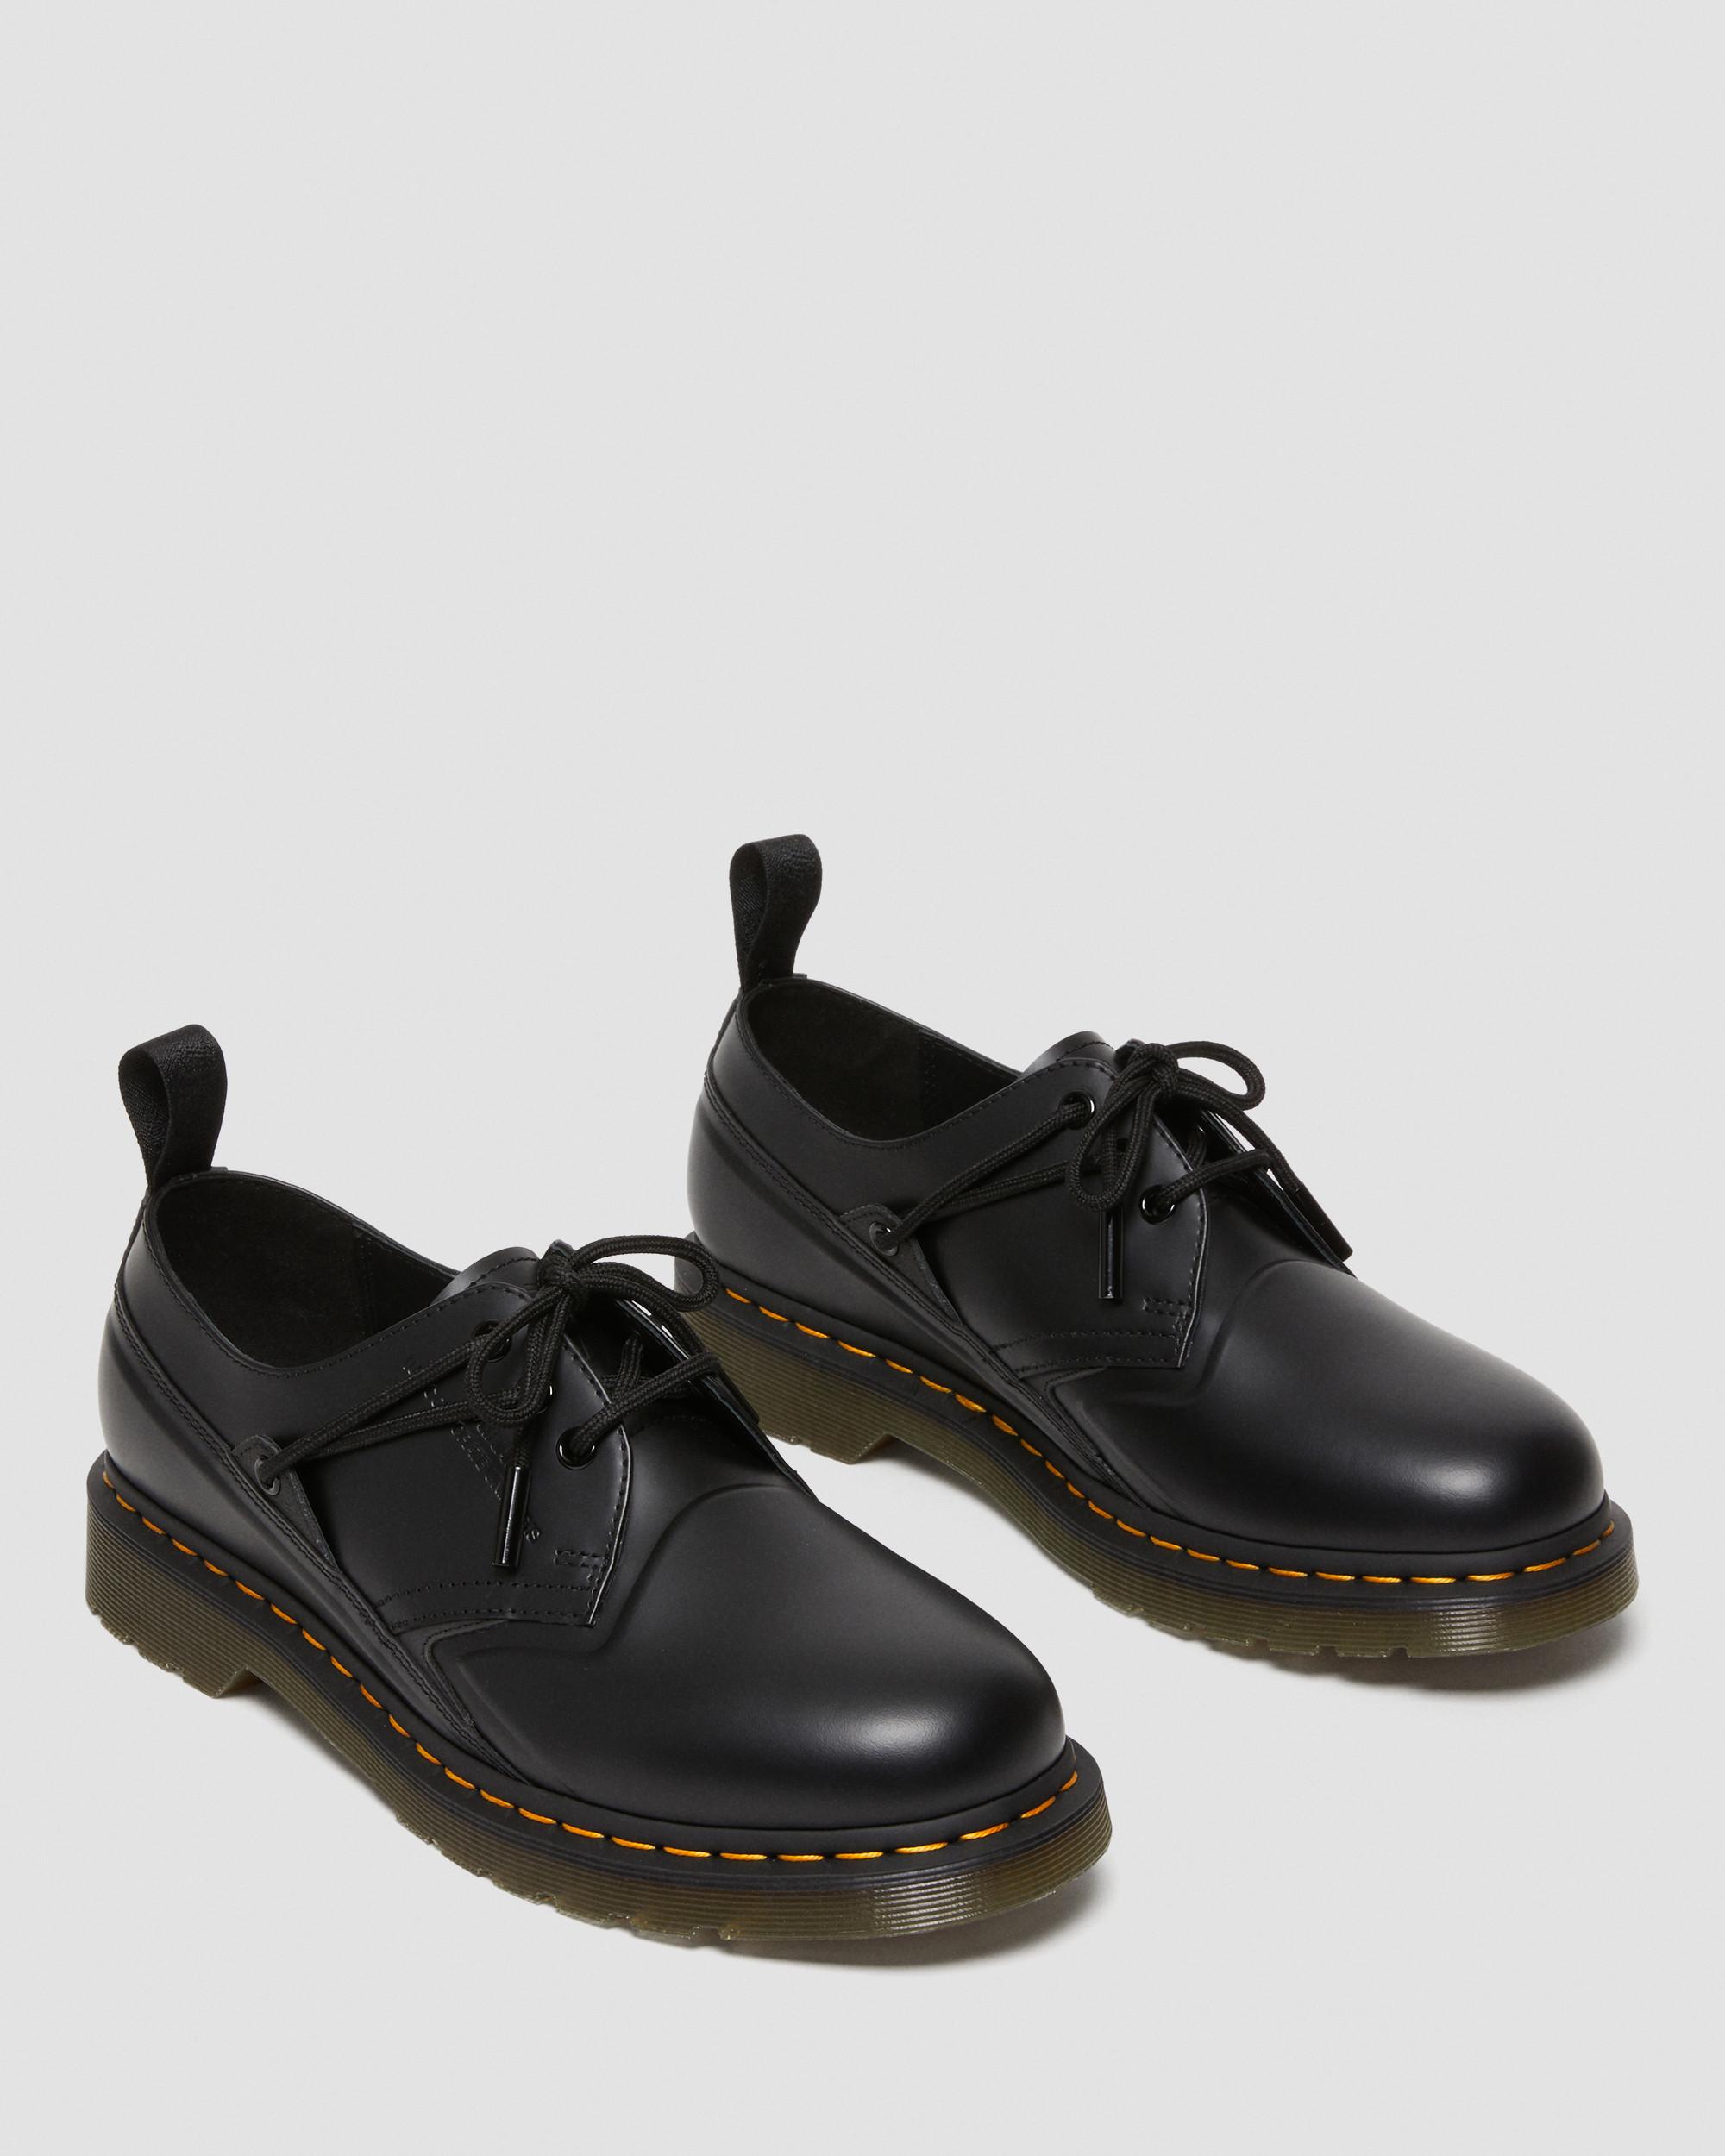 1461 Slam Jam Smooth Leather Shoes1461 Slam Jam Smooth Leather Shoes Dr. Martens